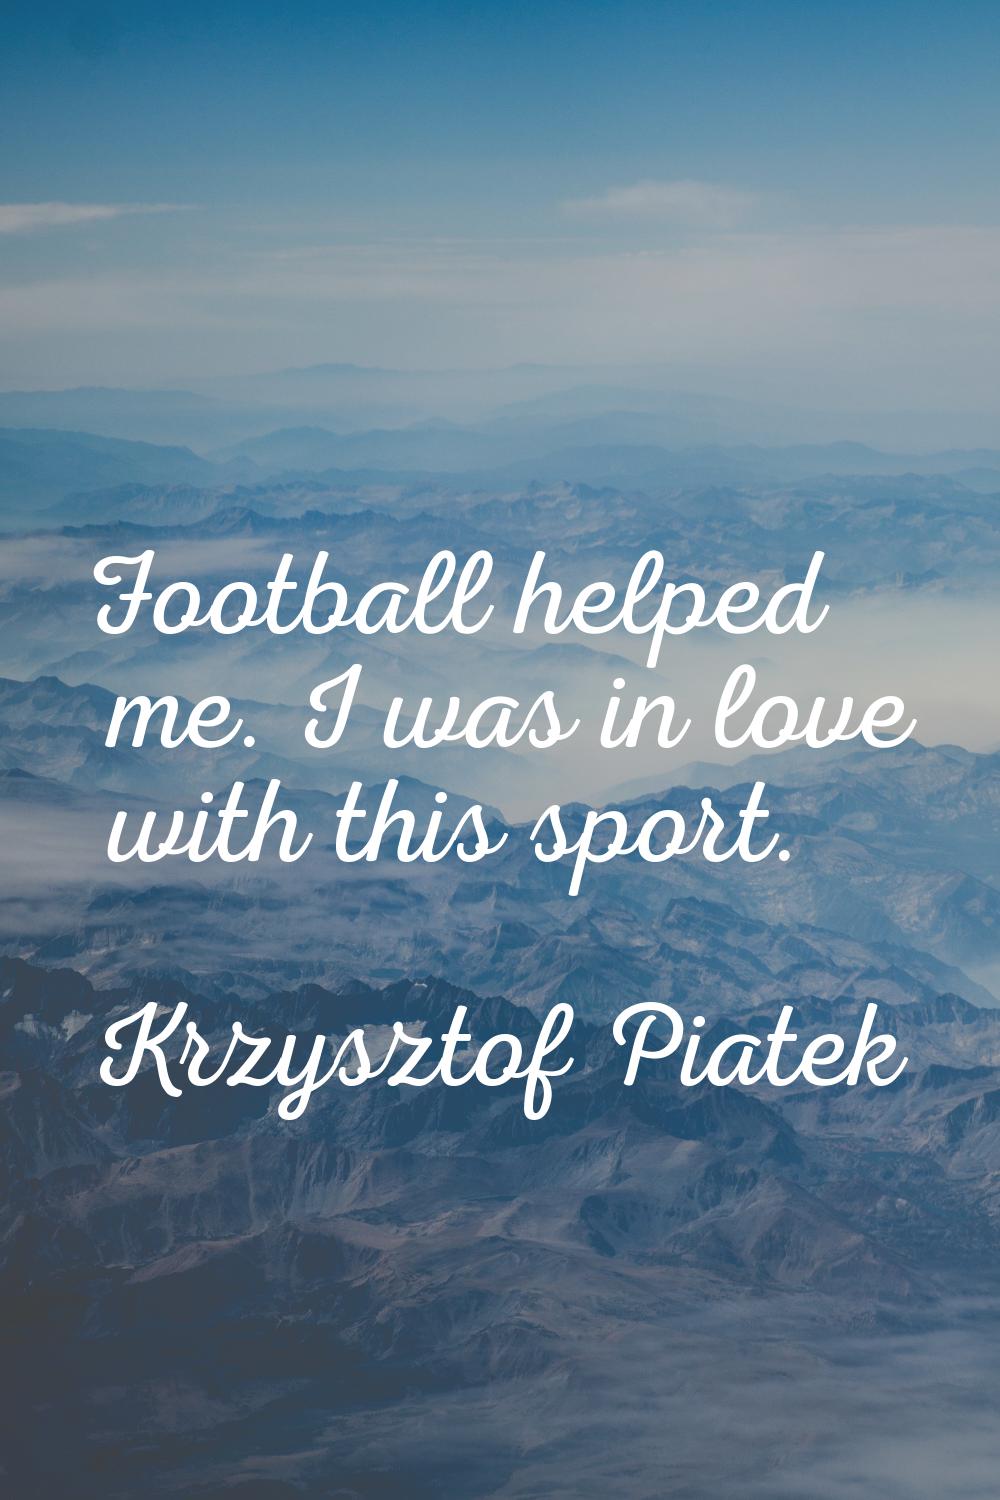 Football helped me. I was in love with this sport.